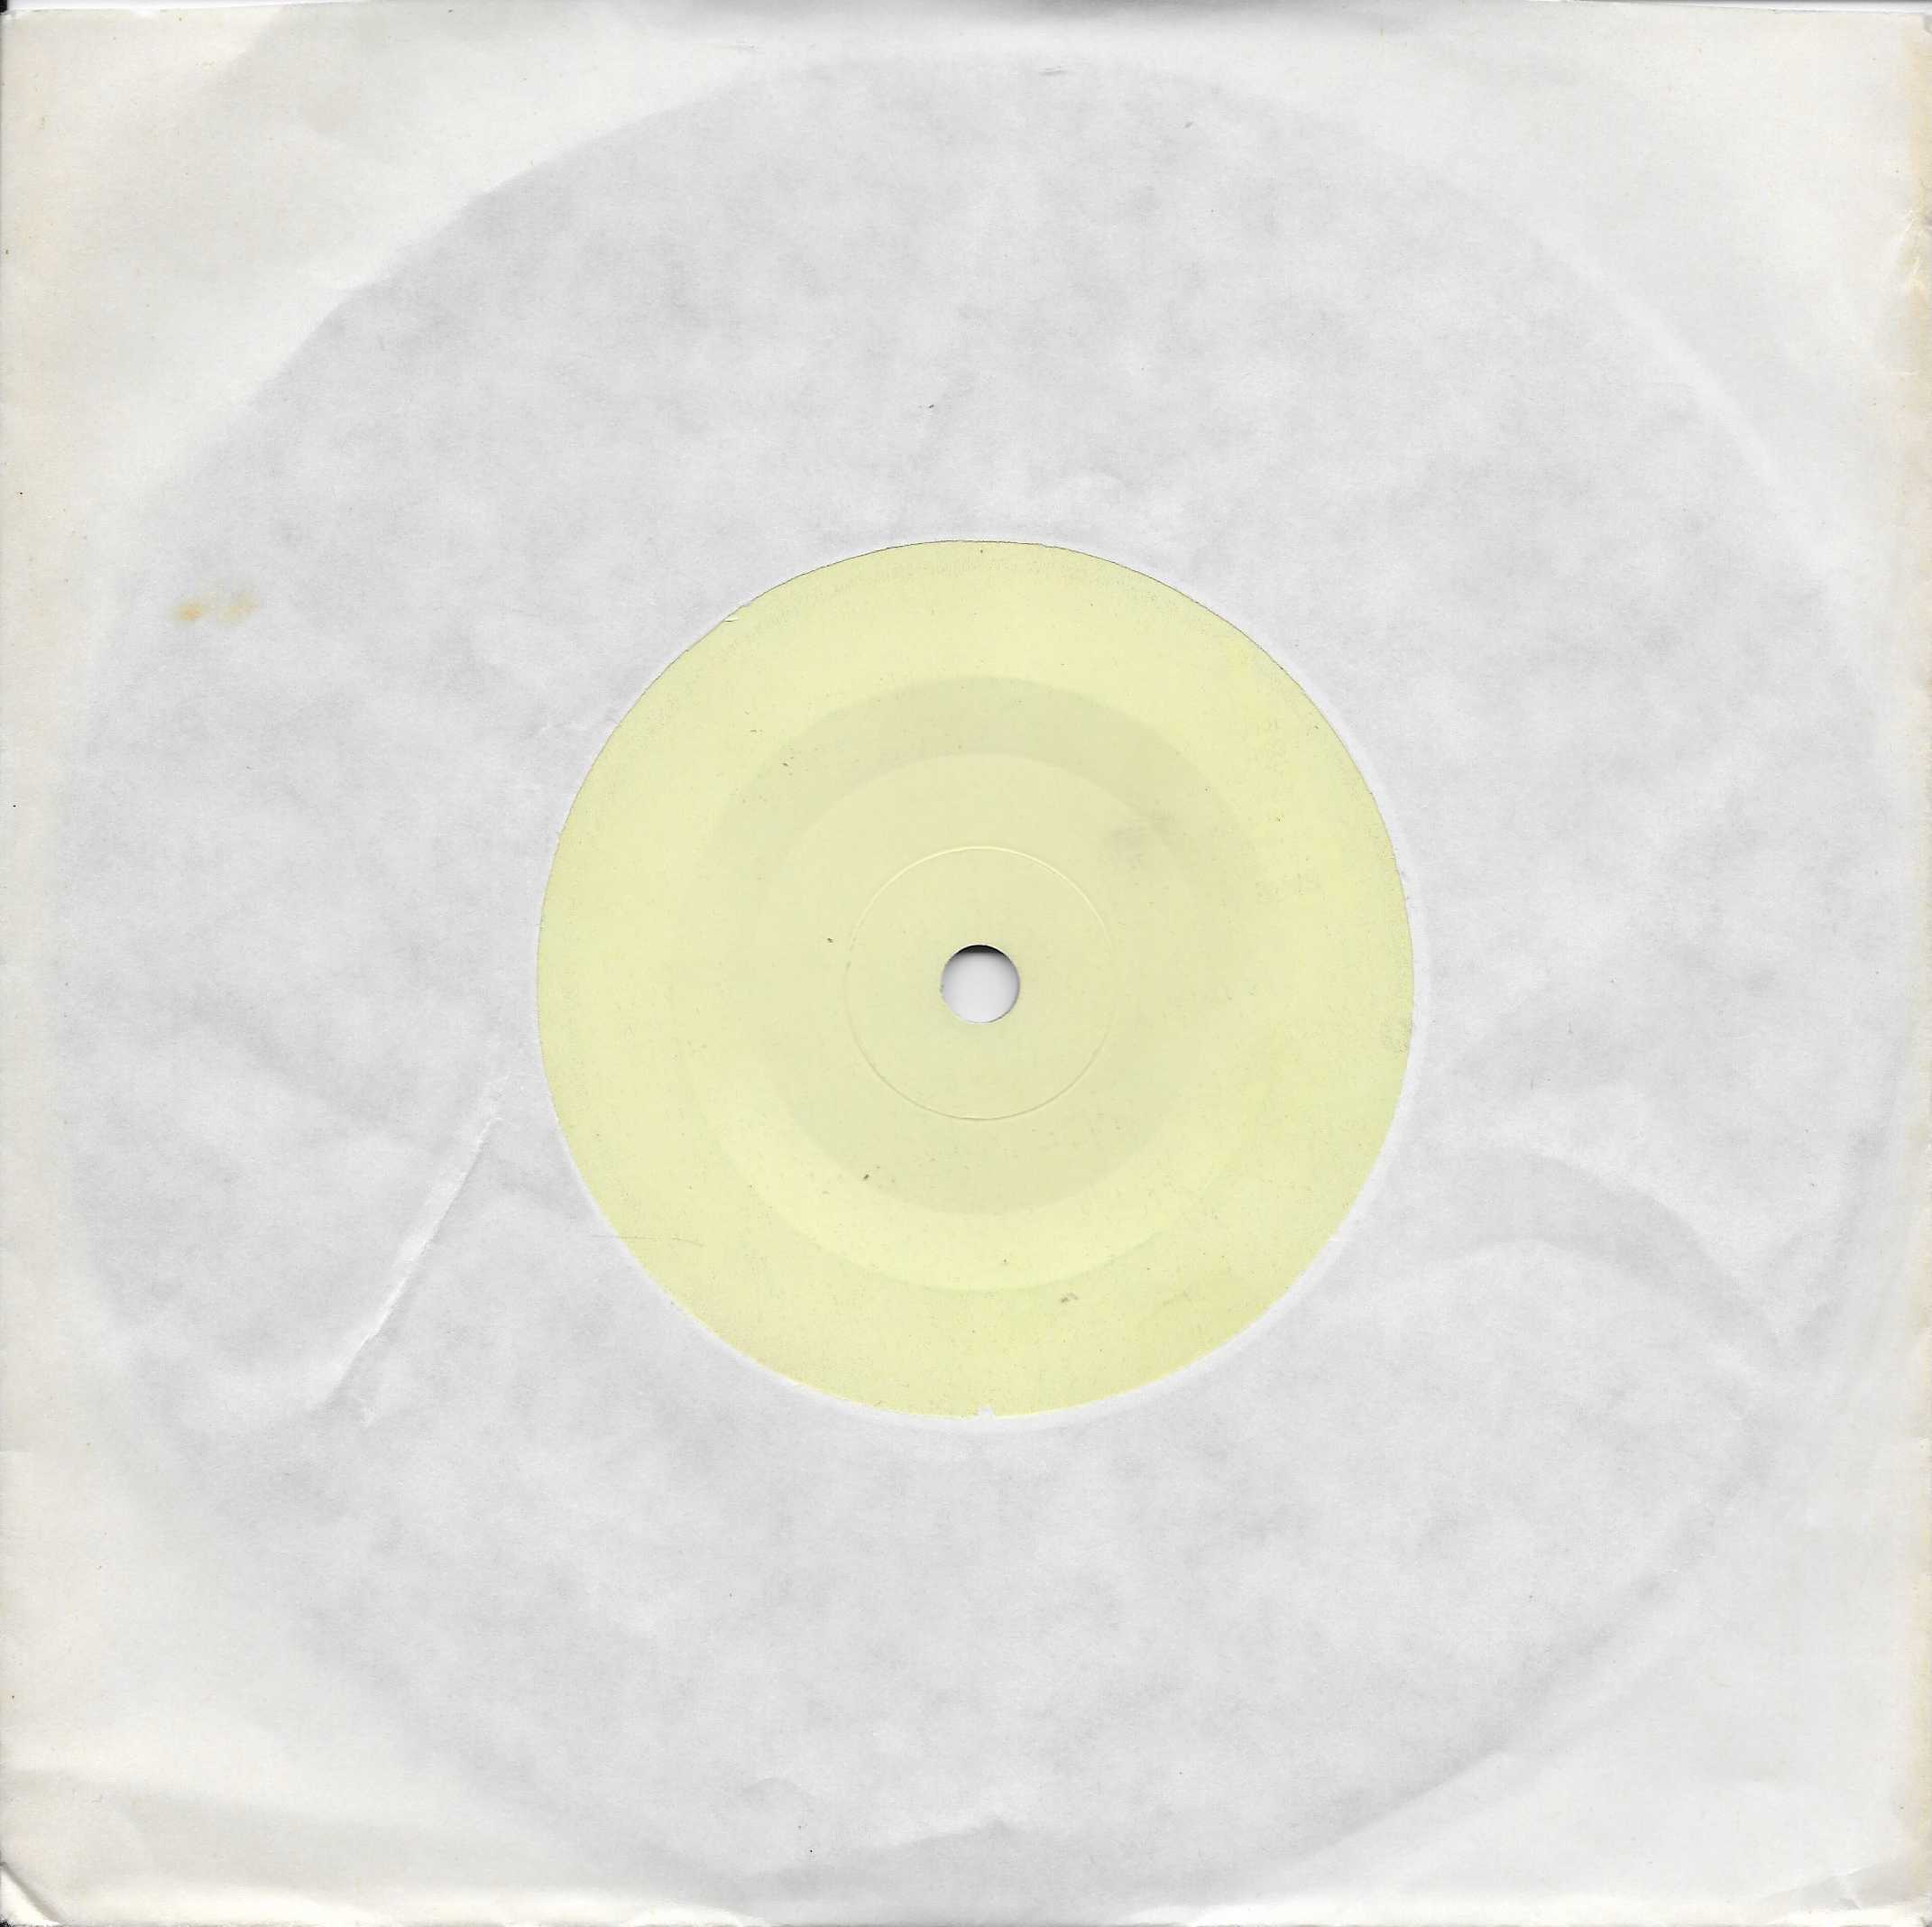 Picture of EDIT 3319 Je T'aime (Allo Allo - Stage music) - White label test pressing single by artist David Croft / R Moore / Ren And Yvette from the BBC records and Tapes library